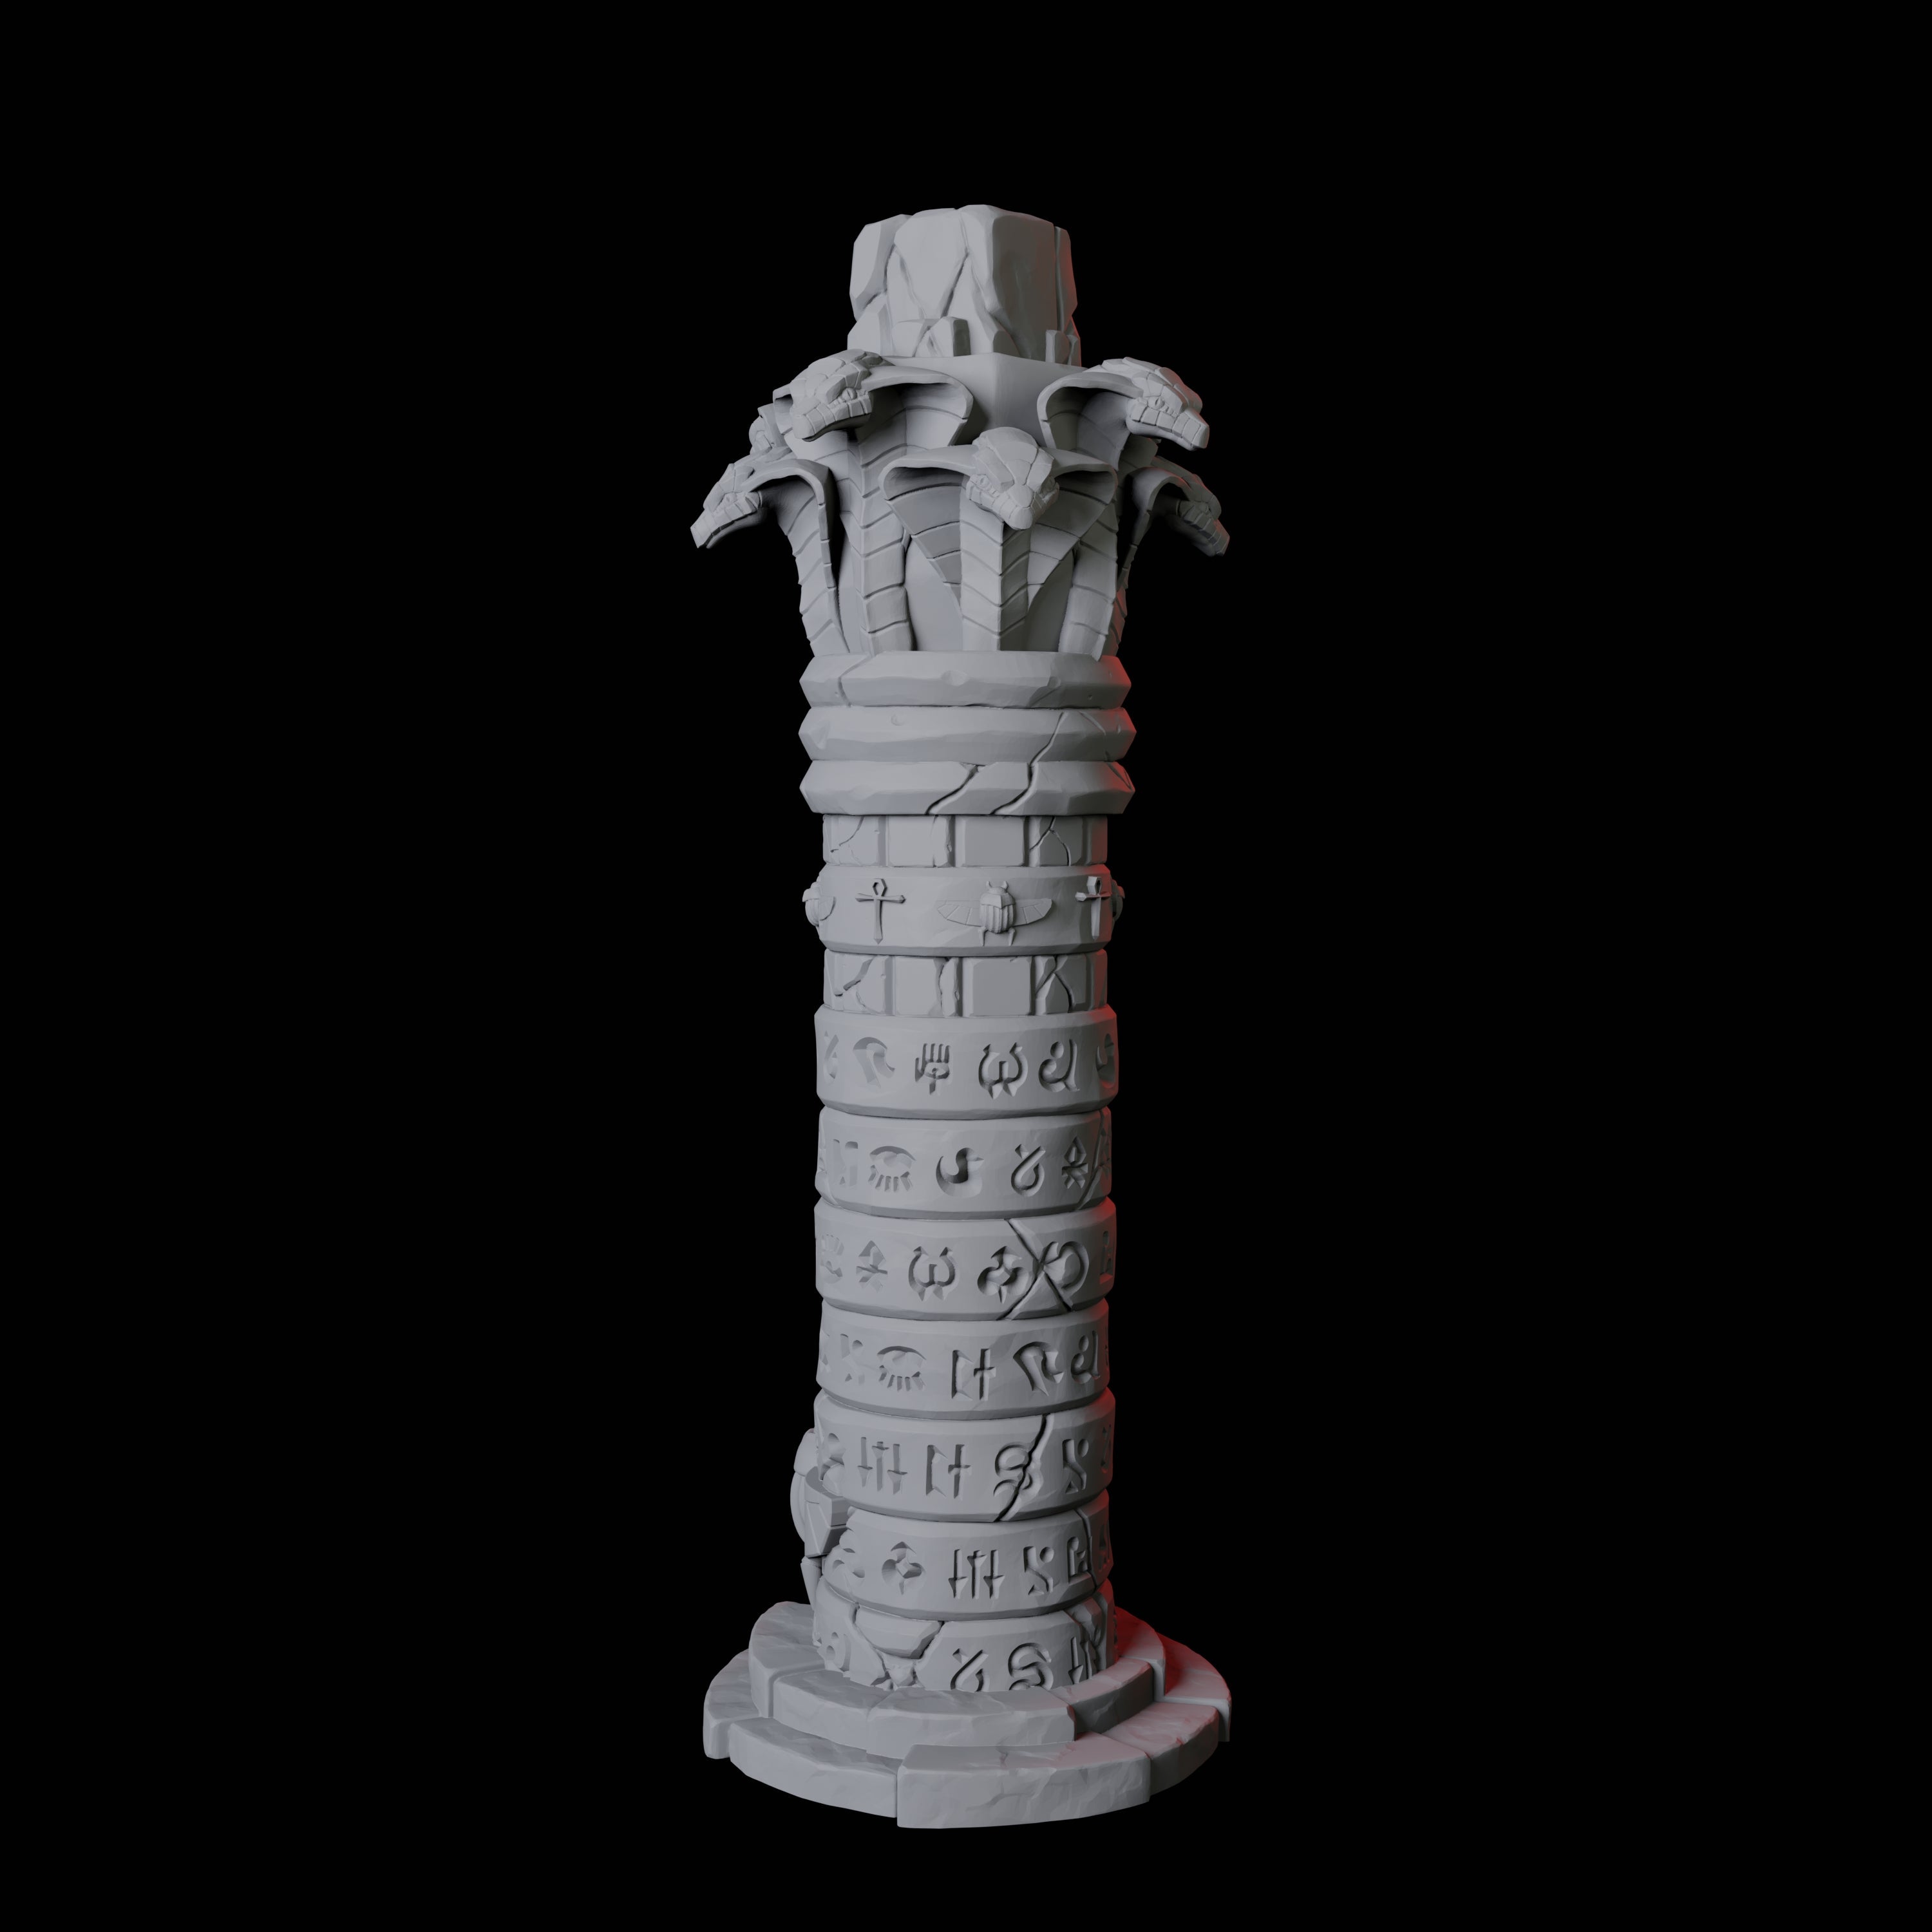 Ancient Egyptian Pillar B Miniature for Dungeons and Dragons, Pathfinder or other TTRPGs